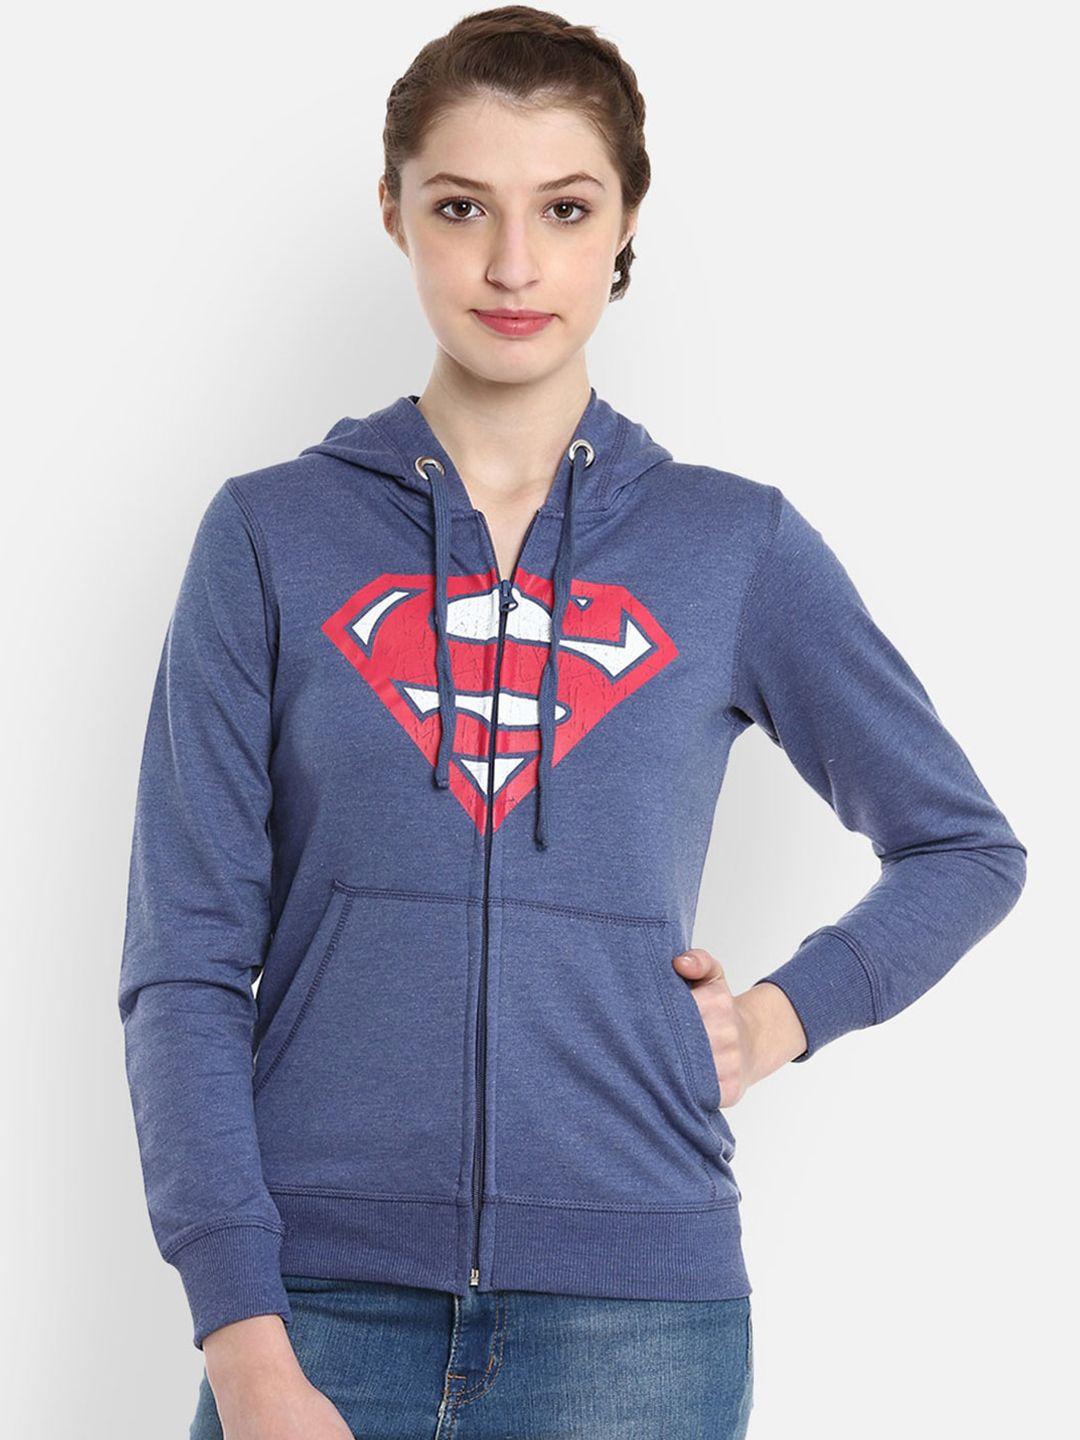 free authority superman featured blue printed hooded sweatshirt for women